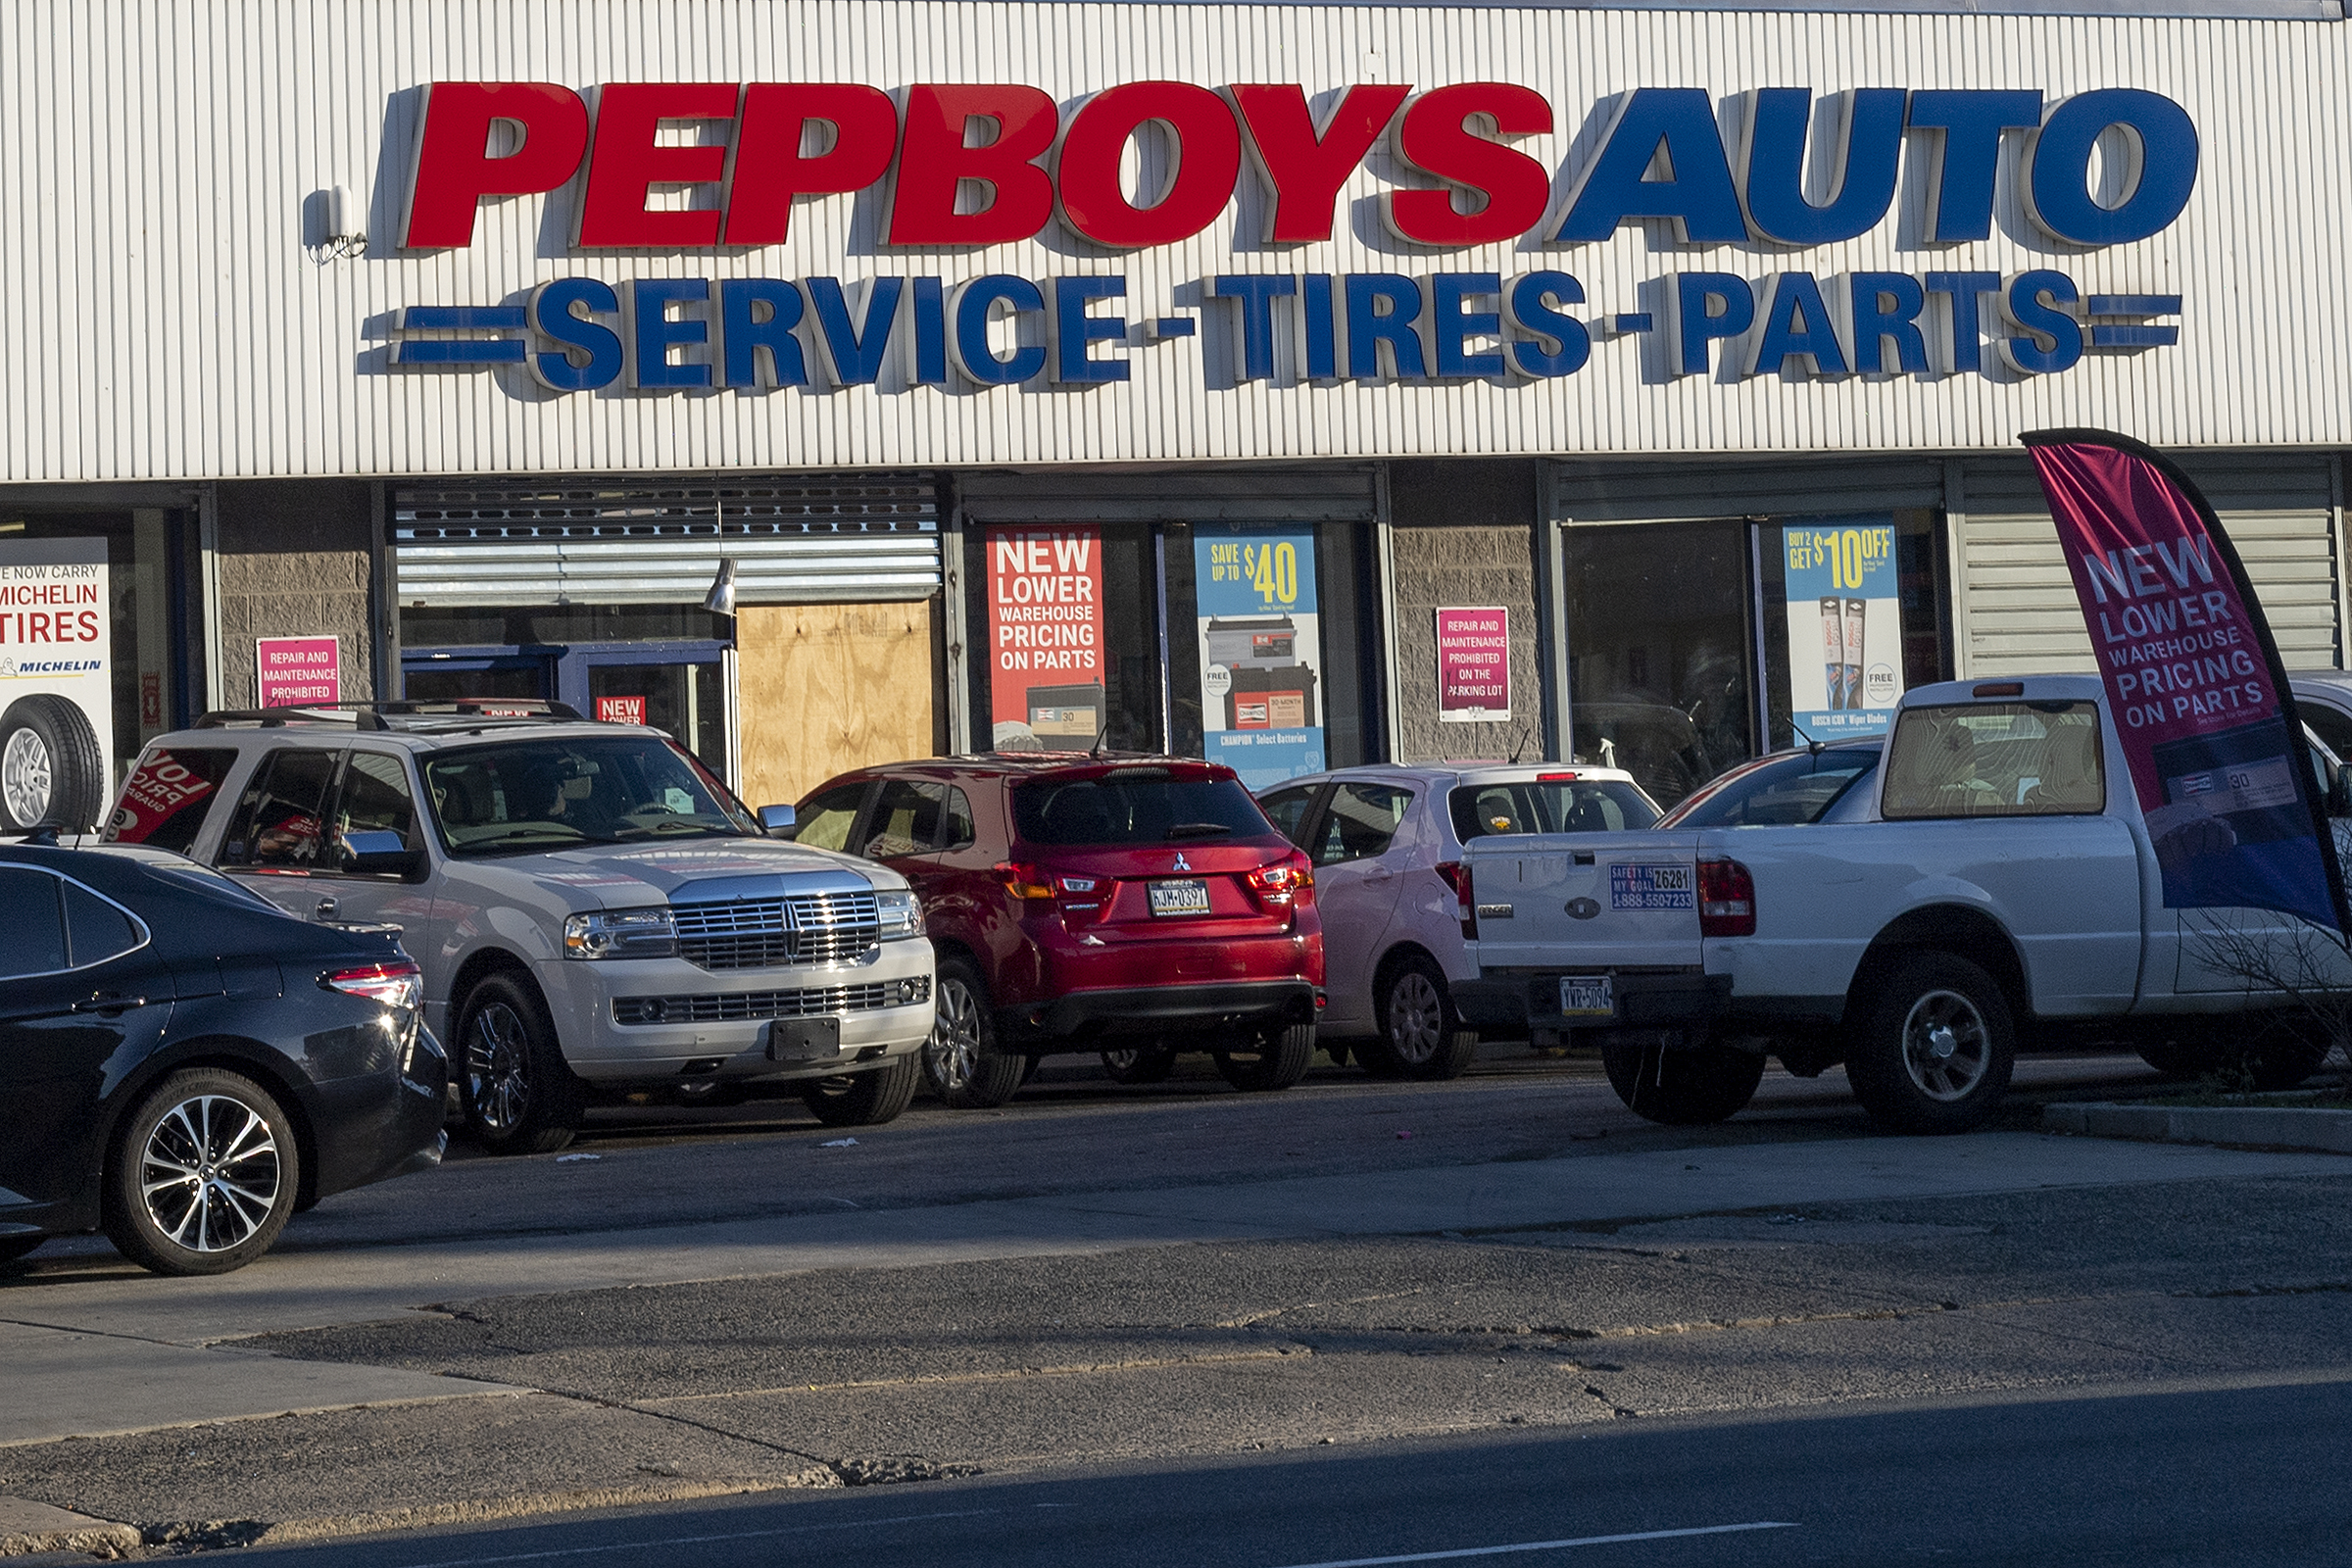 Billionaire Carl Icahn Has Sold Pep Boys Hq As The Iconic Company Turns 100 What Lies Ahead